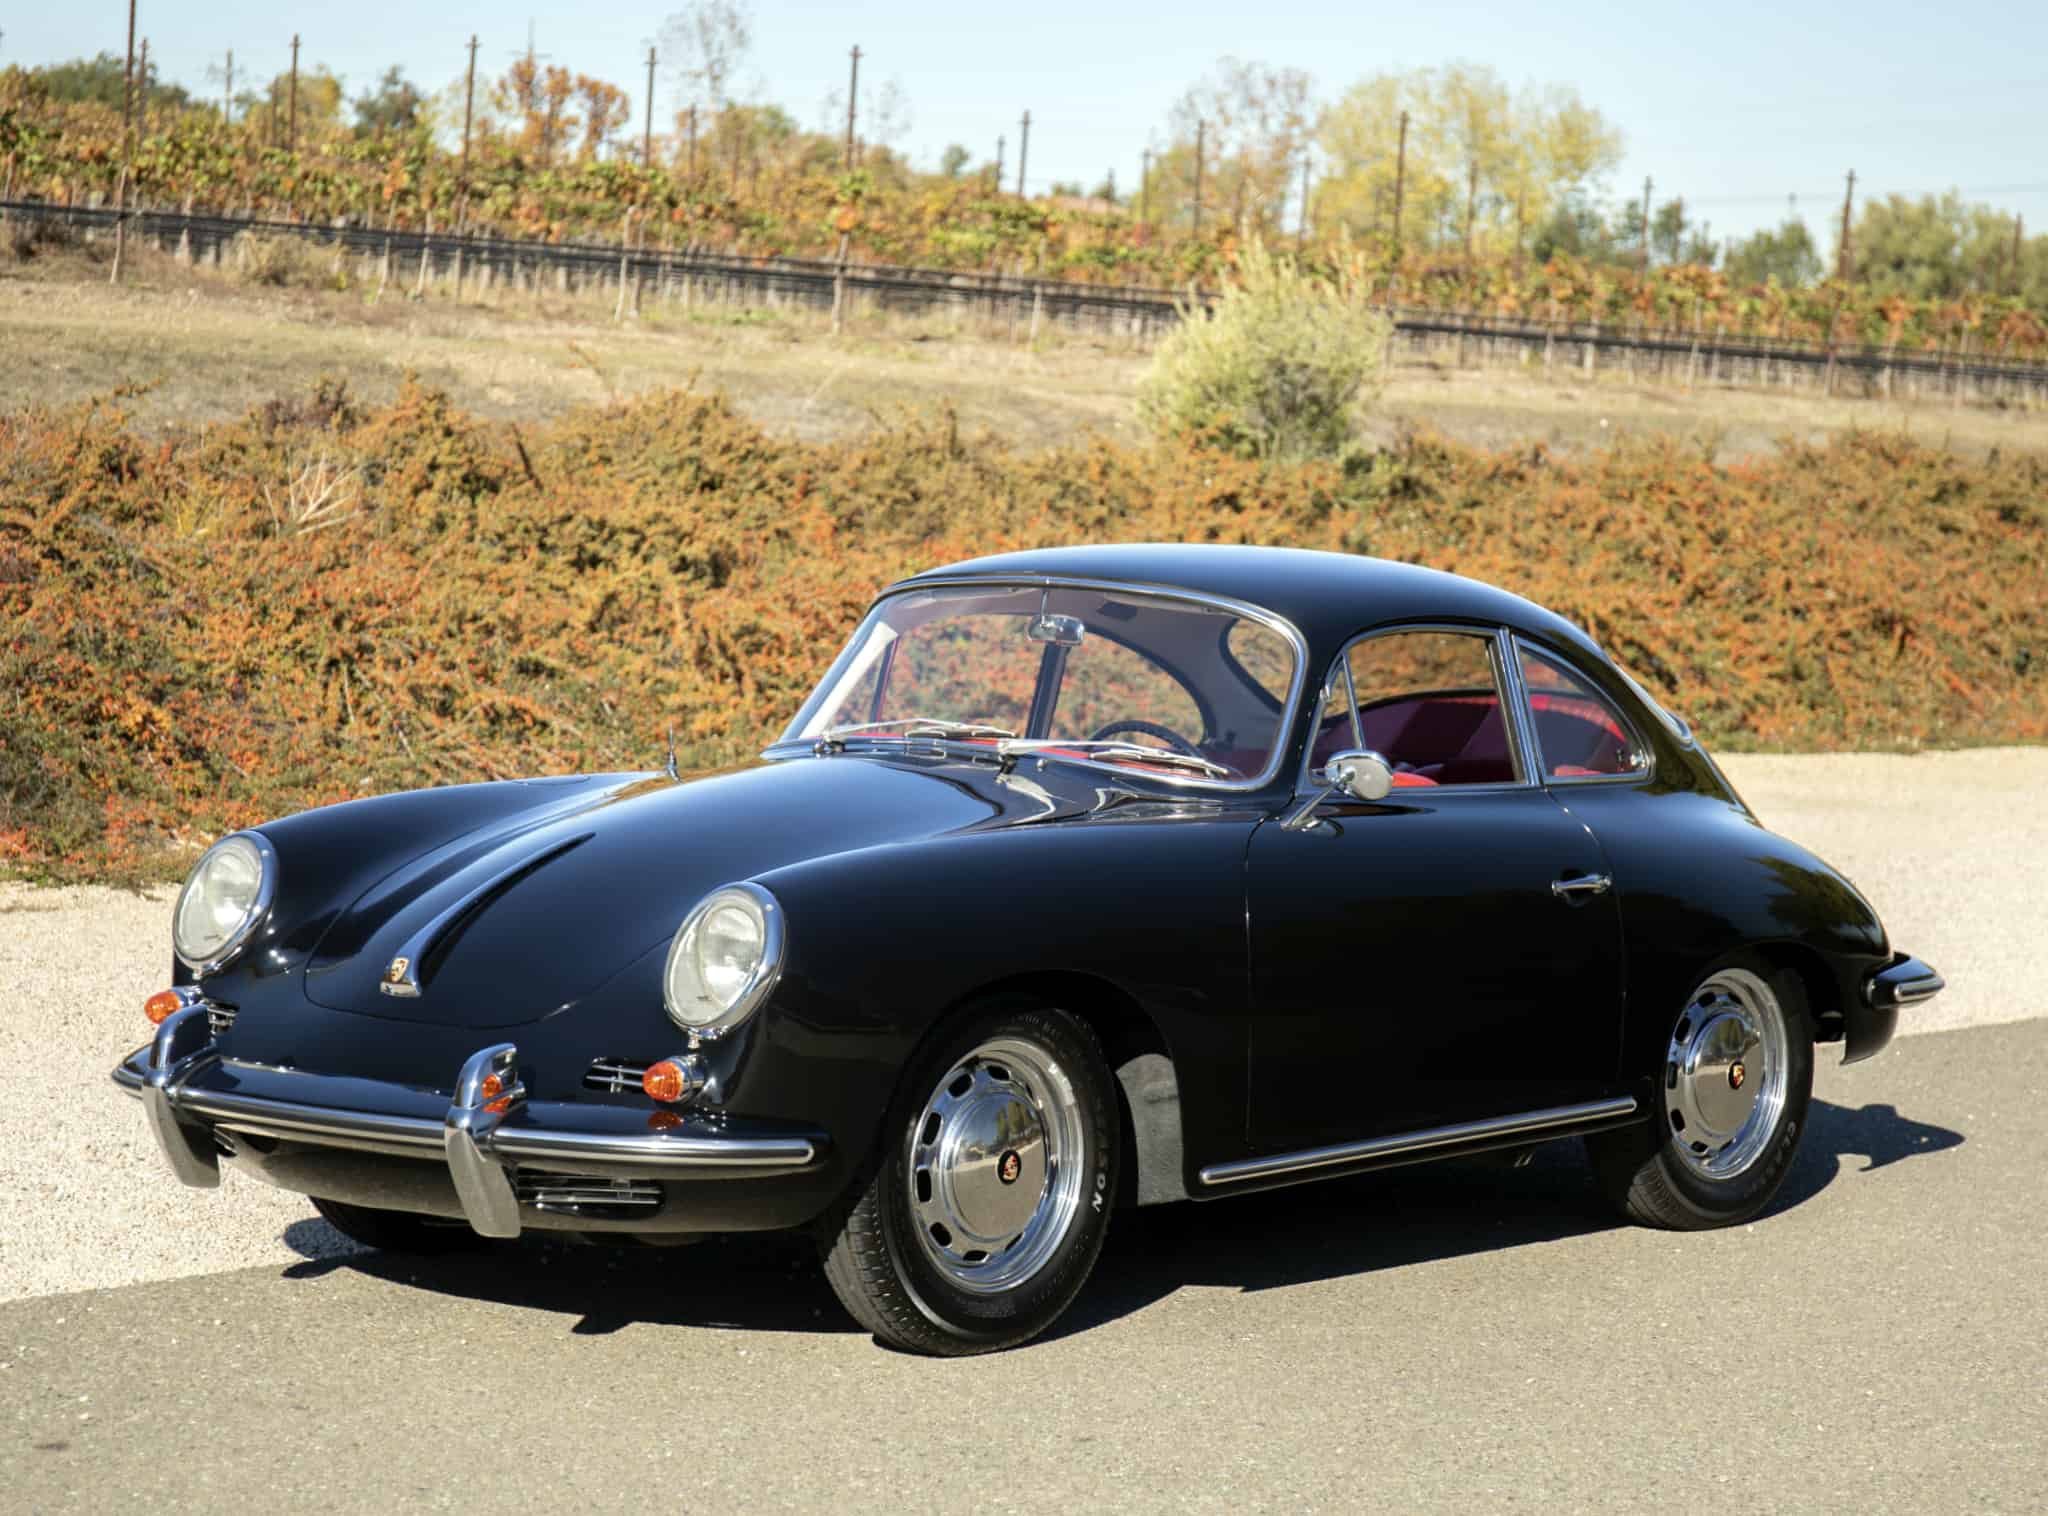 Dusty Cars buys and restores classic Porsche cars.